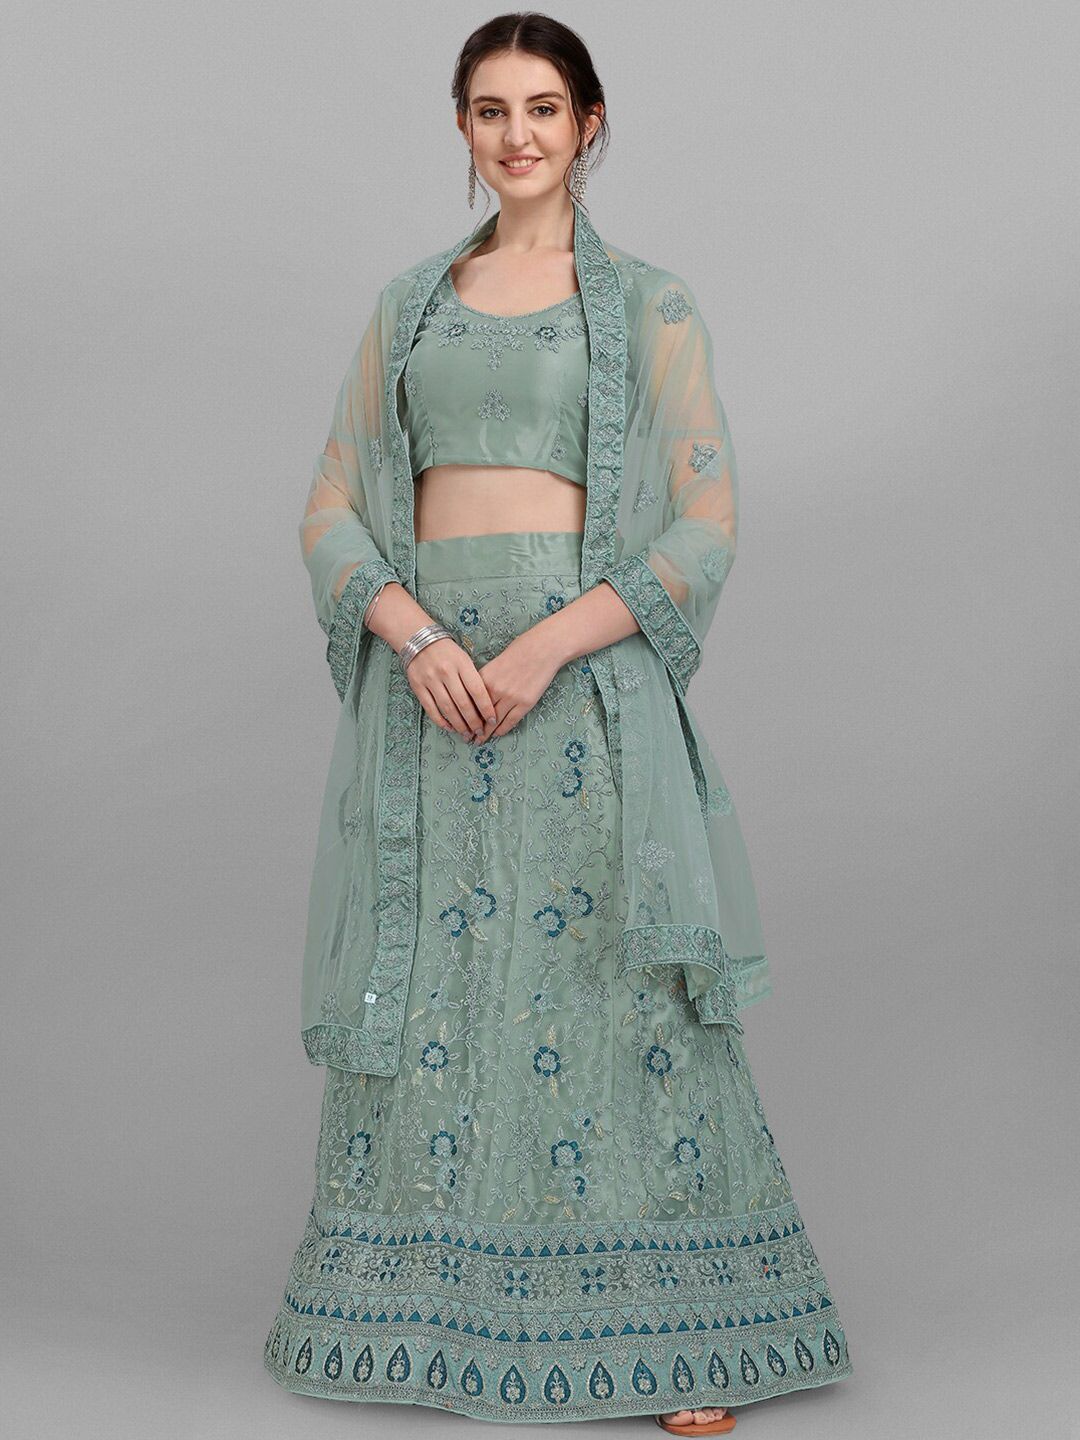 V SALES Sea Green & Silver-Toned Embroidered Zari Work Semi-Stitched Lehenga & Unstitched Blouse With Dupatta Price in India